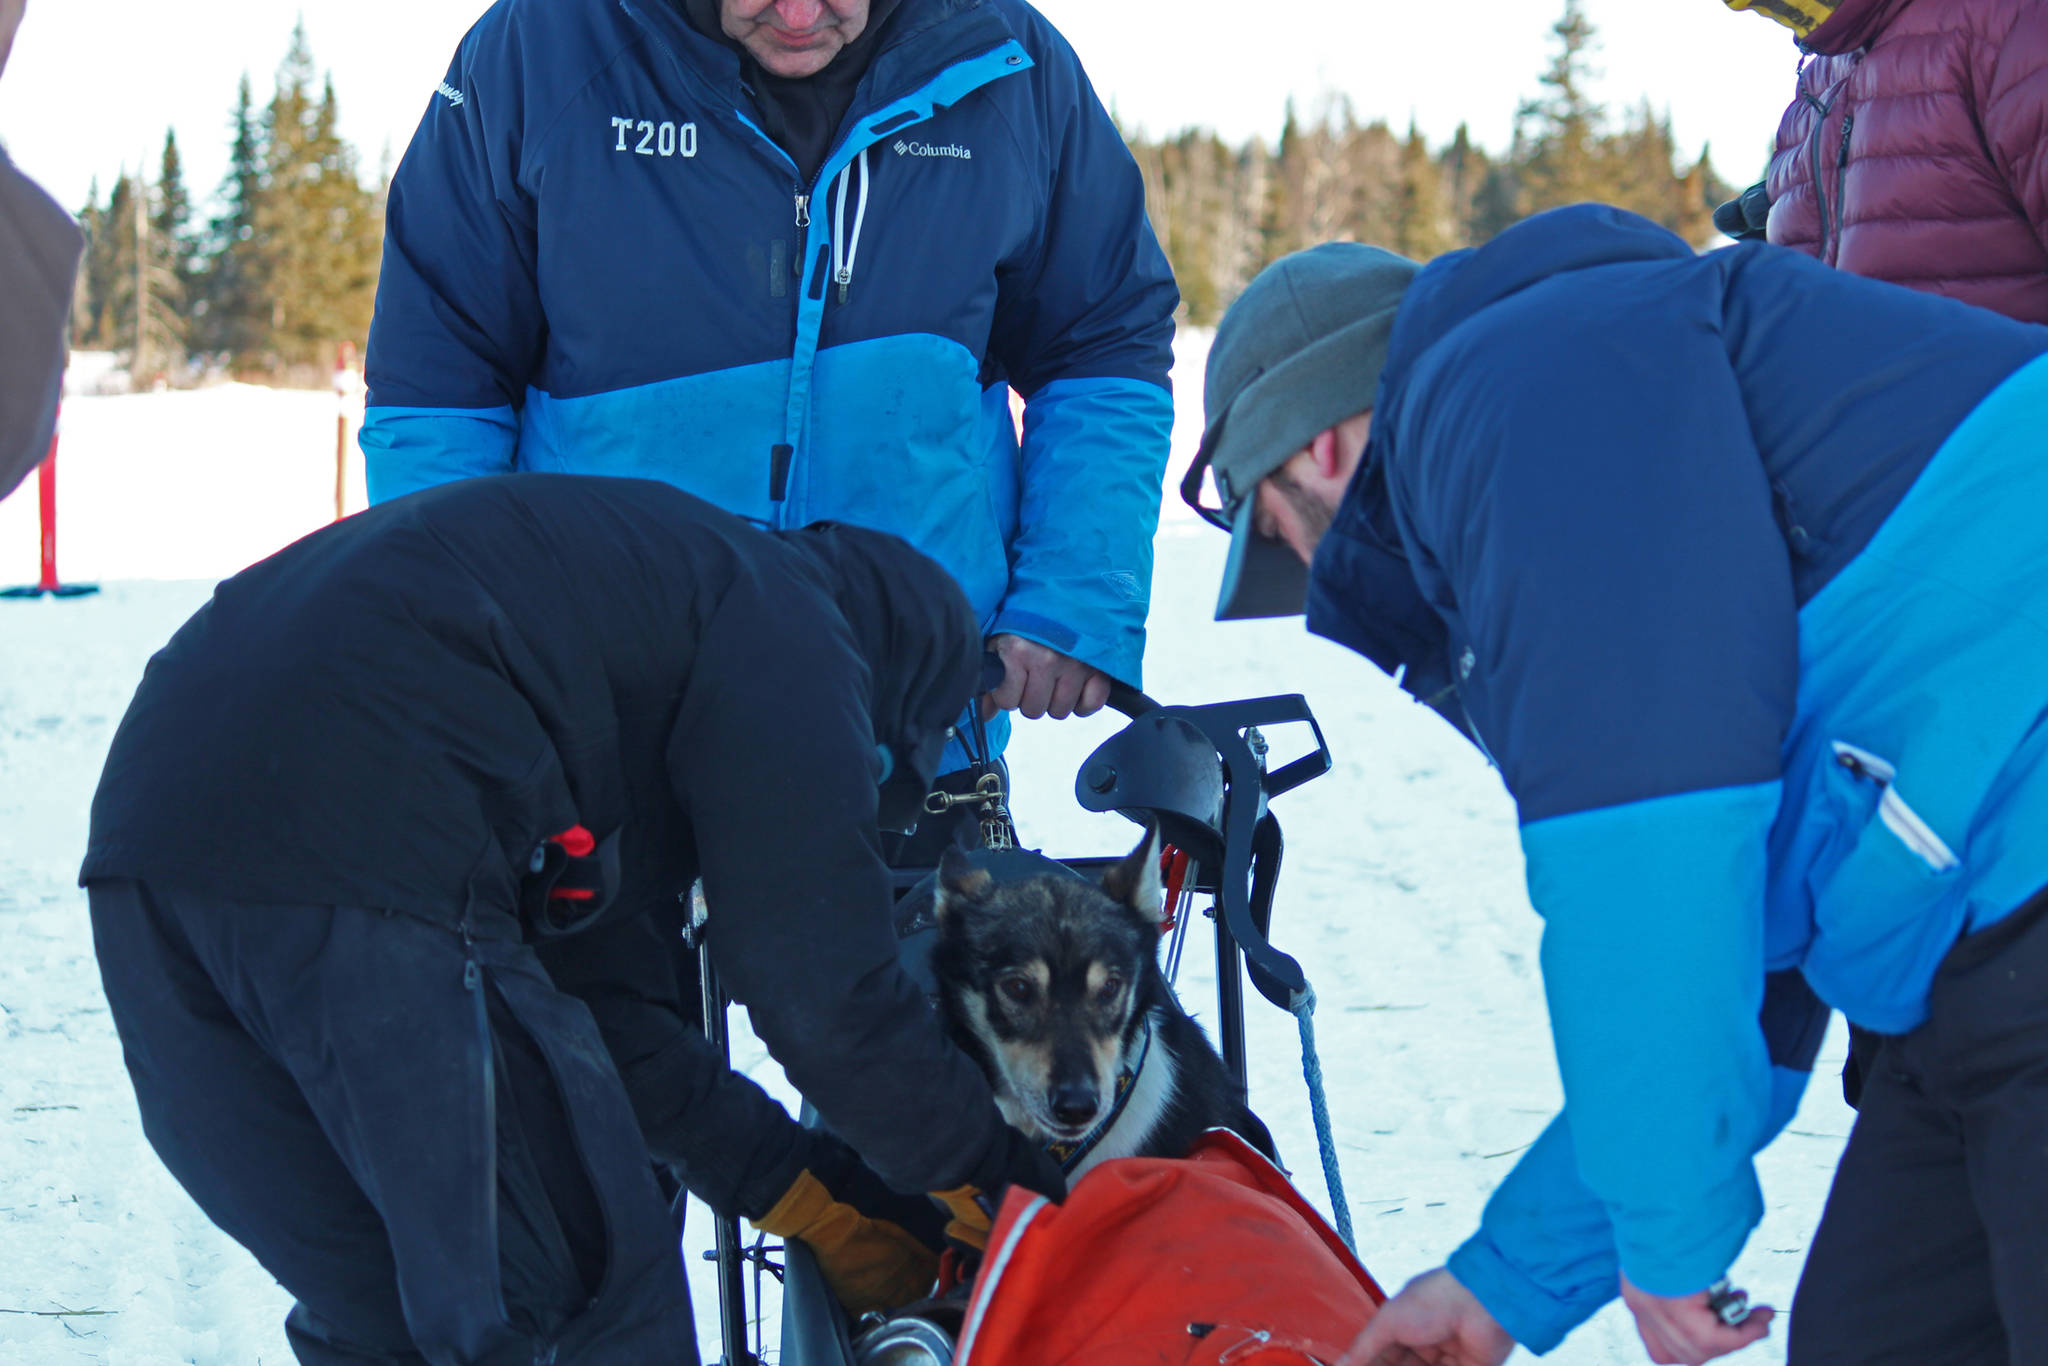 Musher Dave Turner unzips a sled dog from the sack on his sled at the finish line of the Tustumena 200 Sled Dog Race after taking third place Sunday, Jan. 28, 2018 in Ninilchik, Alaska. Turner ran the T200 for the first time in 2017, when he also took third place. (Photo by Megan Pacer/Homer News)